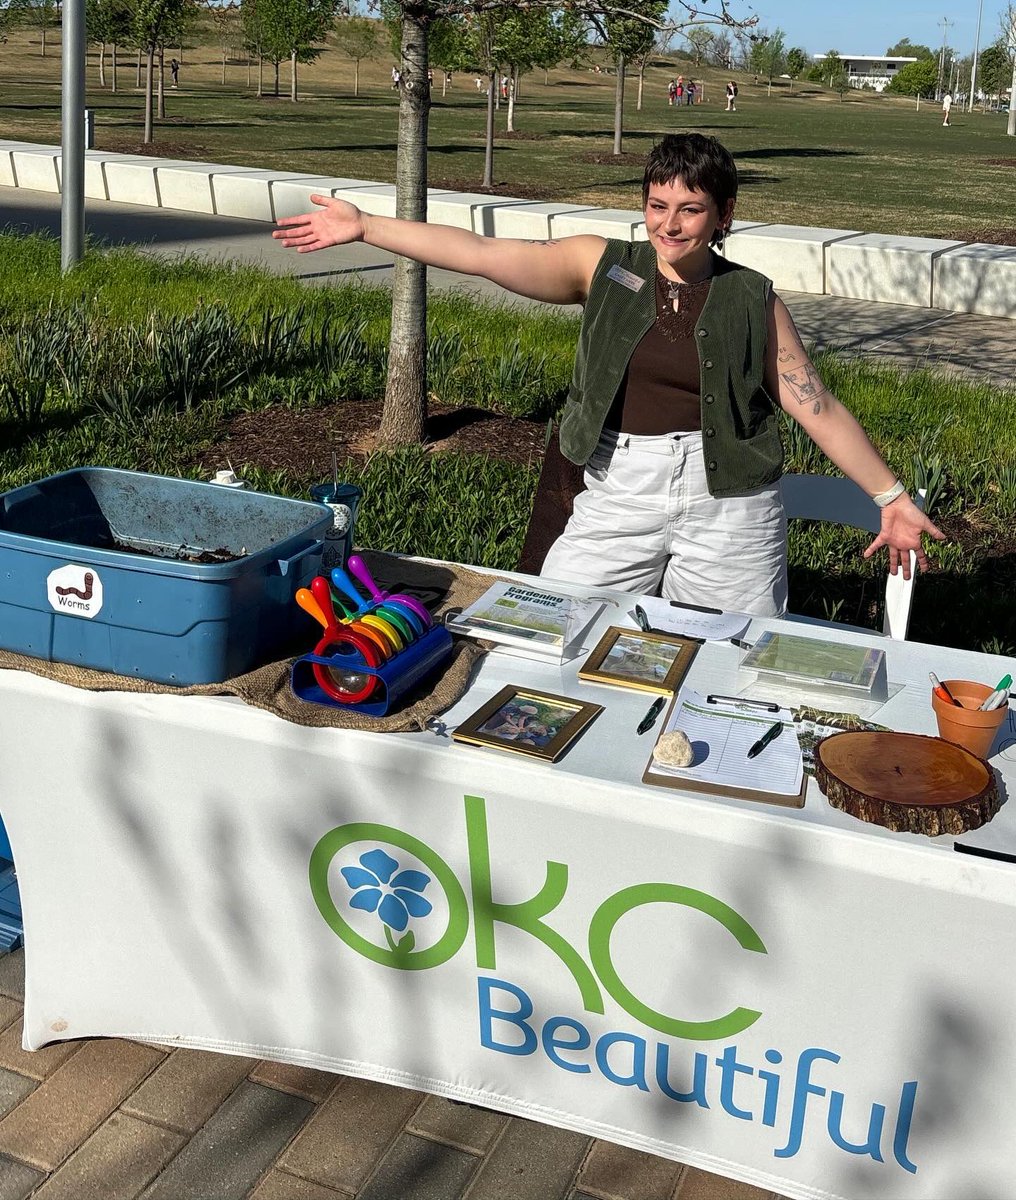 The @ScissortailPark Market is back in season! You can catch us here most Saturdays for environmental ed, activities, and resources. Thanks to everyone who stopped by to learn about composting and join in our conversation about connecting with nature. We’ll be back next week. 🤠